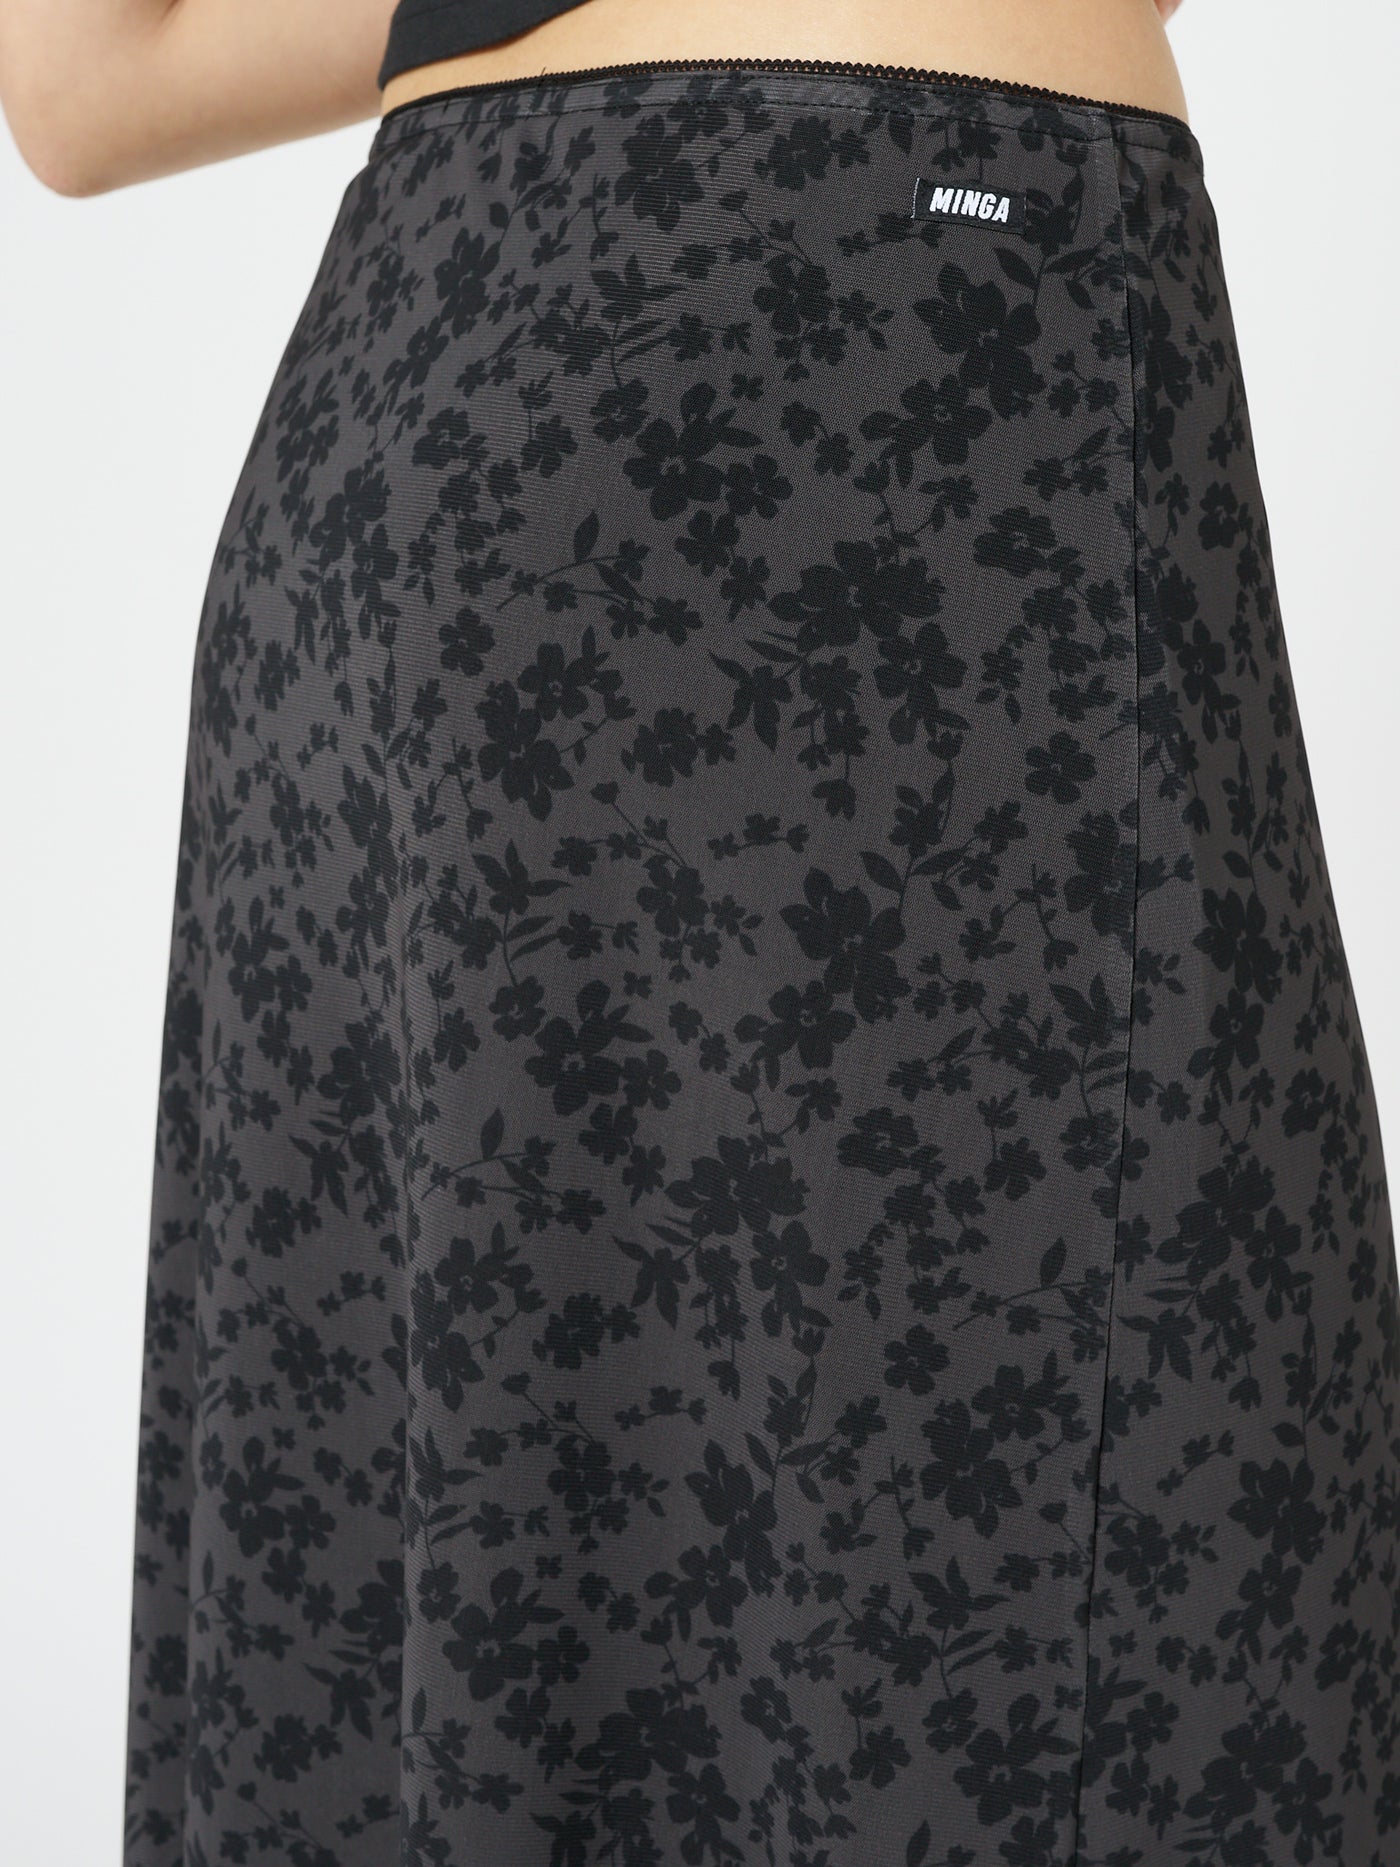 This charming skirt features a captivating floral pattern, flowing silhouette, and a flattering midi length for a enchanting look.